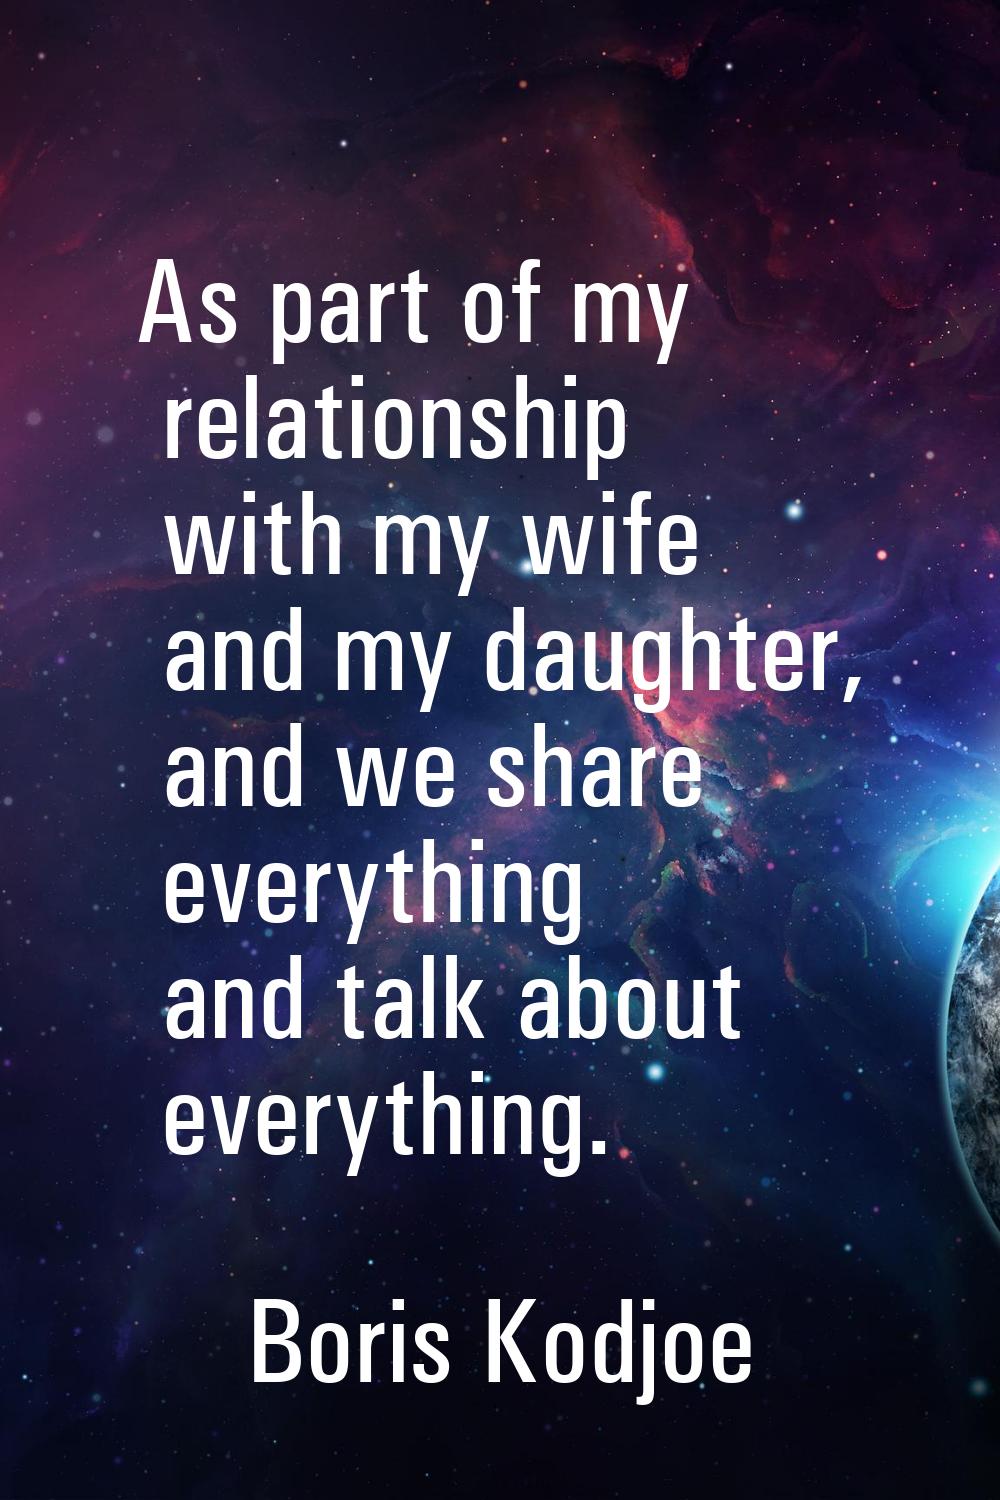 As part of my relationship with my wife and my daughter, and we share everything and talk about eve